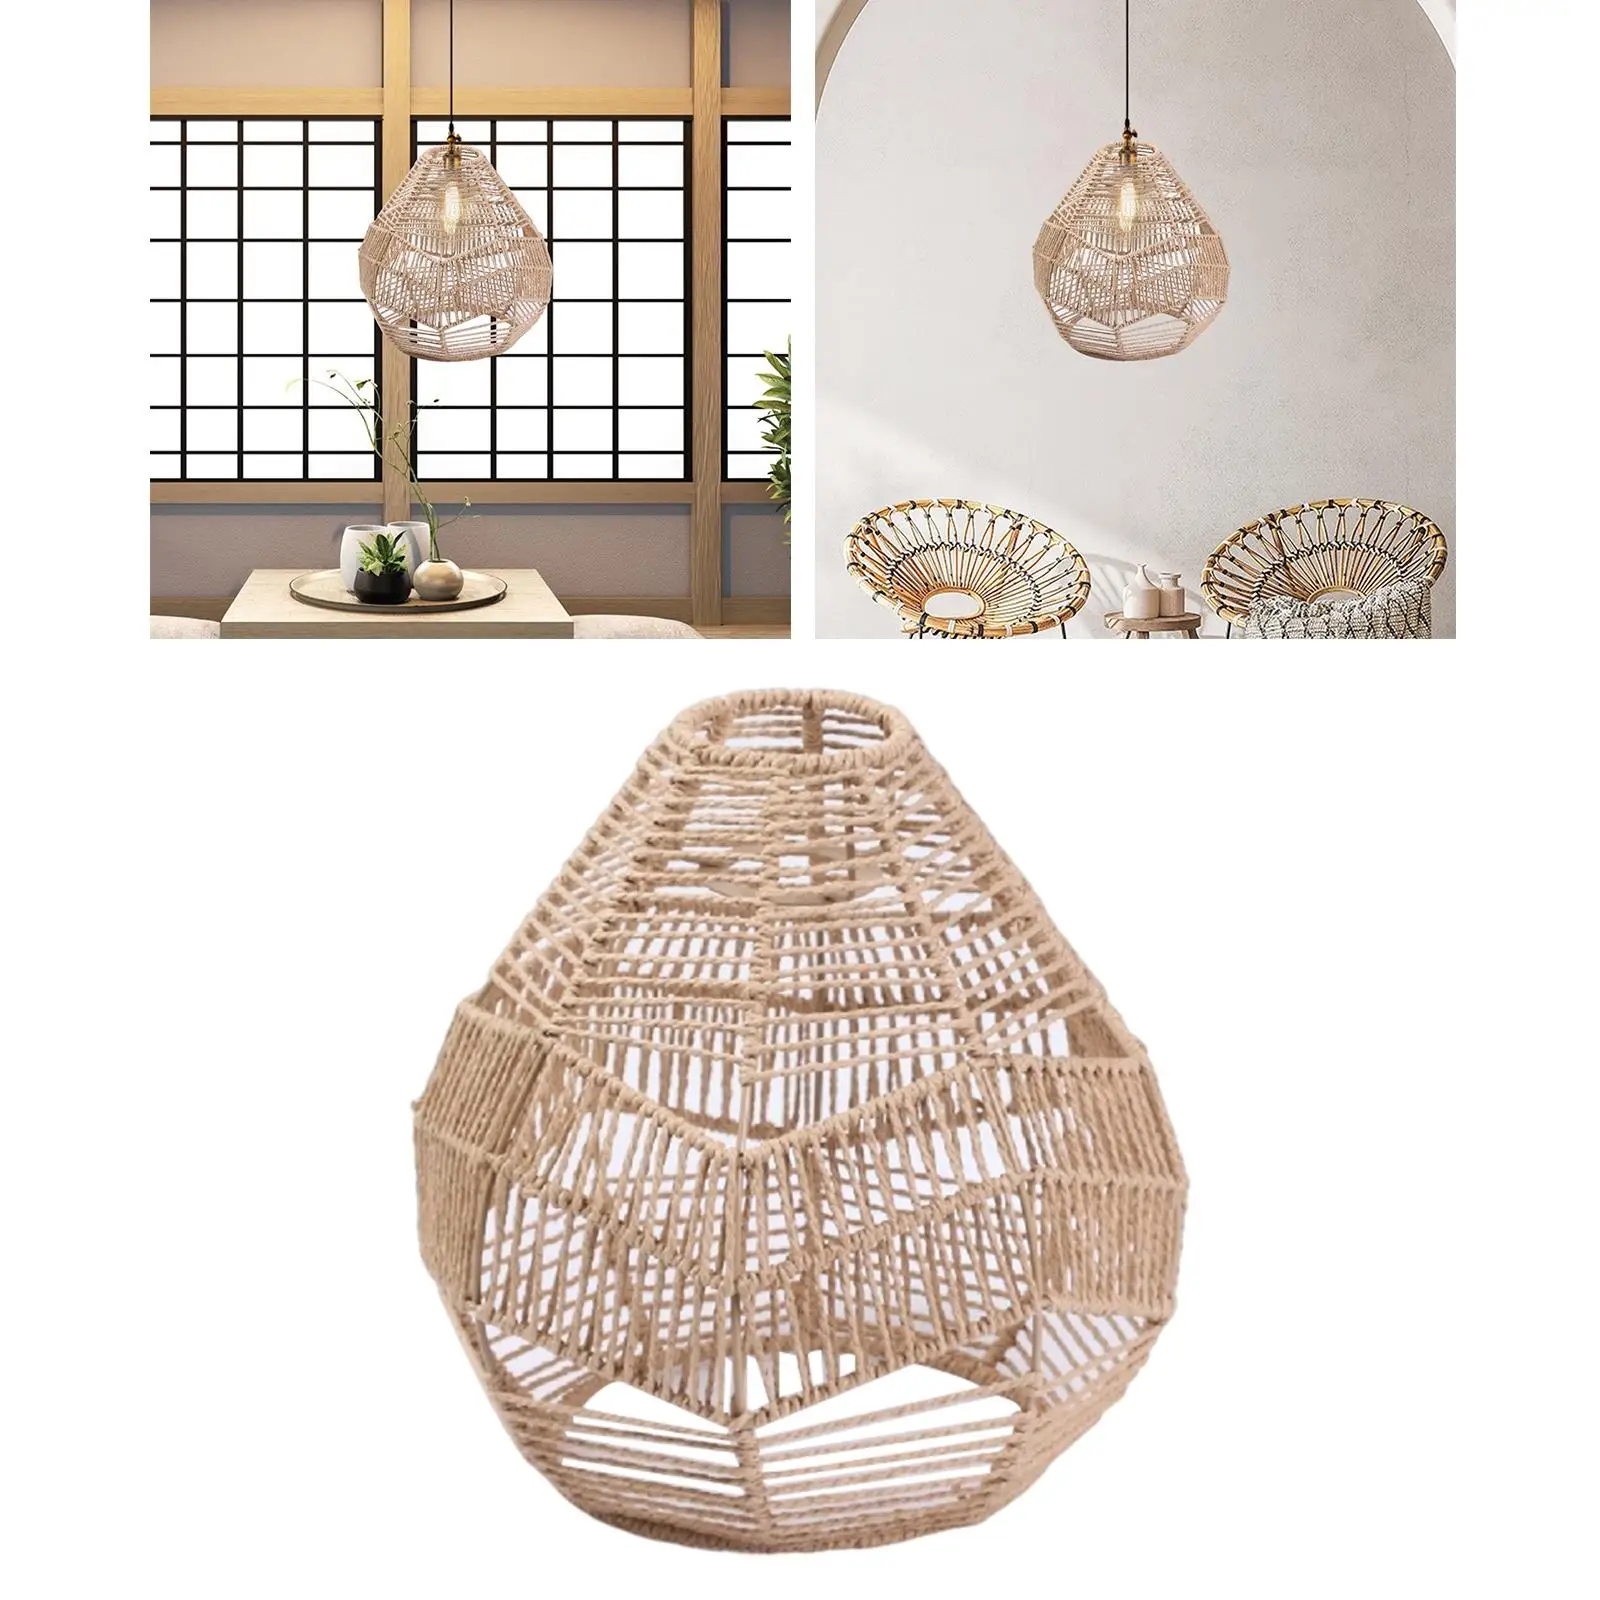 Boho Pendant Lamp Shade Light Fixture Shade Chandelier Cover Lampshade for Kitchen Teahouse Living Room Decoration